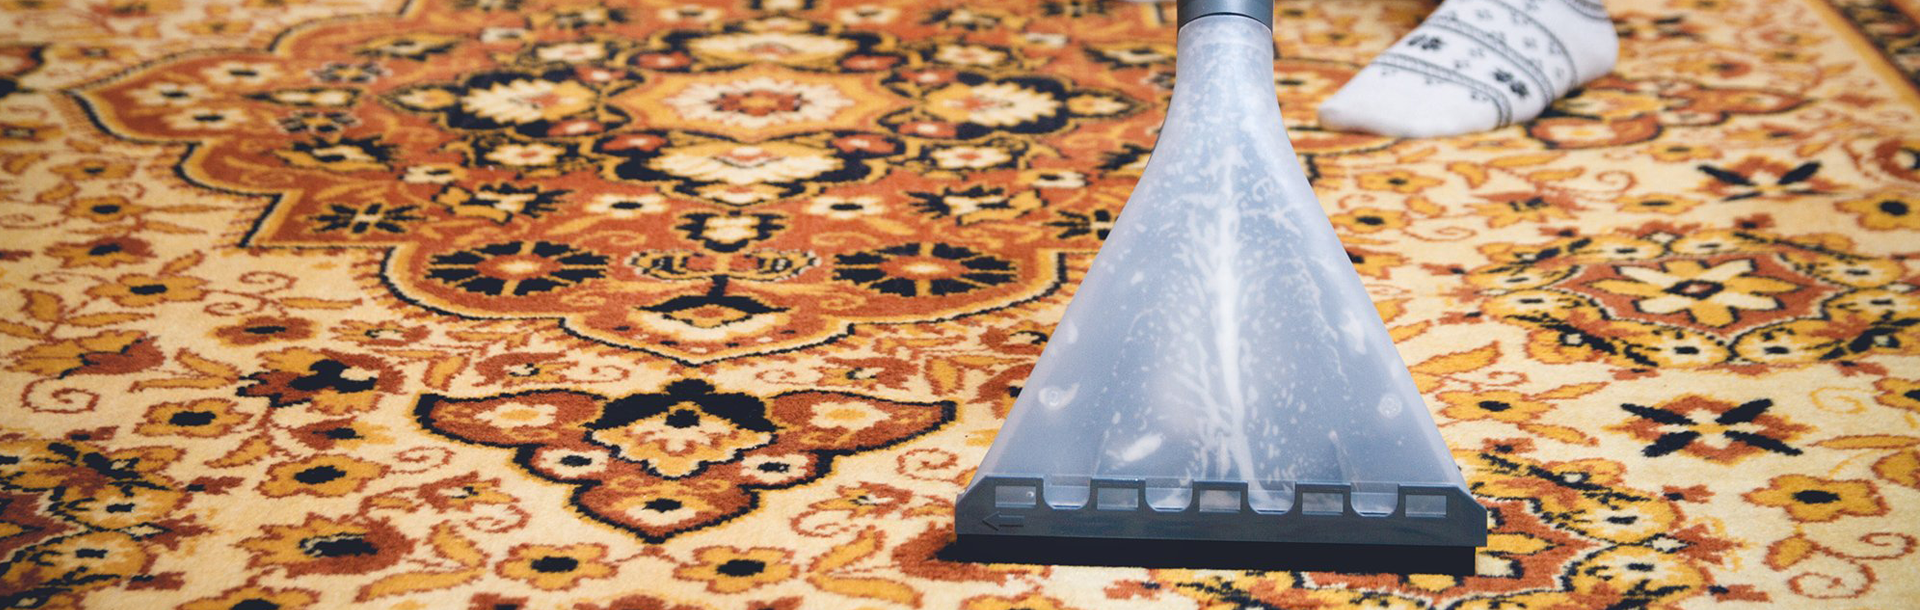 Cleaning Services Limassol, Carpetstery Cleaning, Cyprus